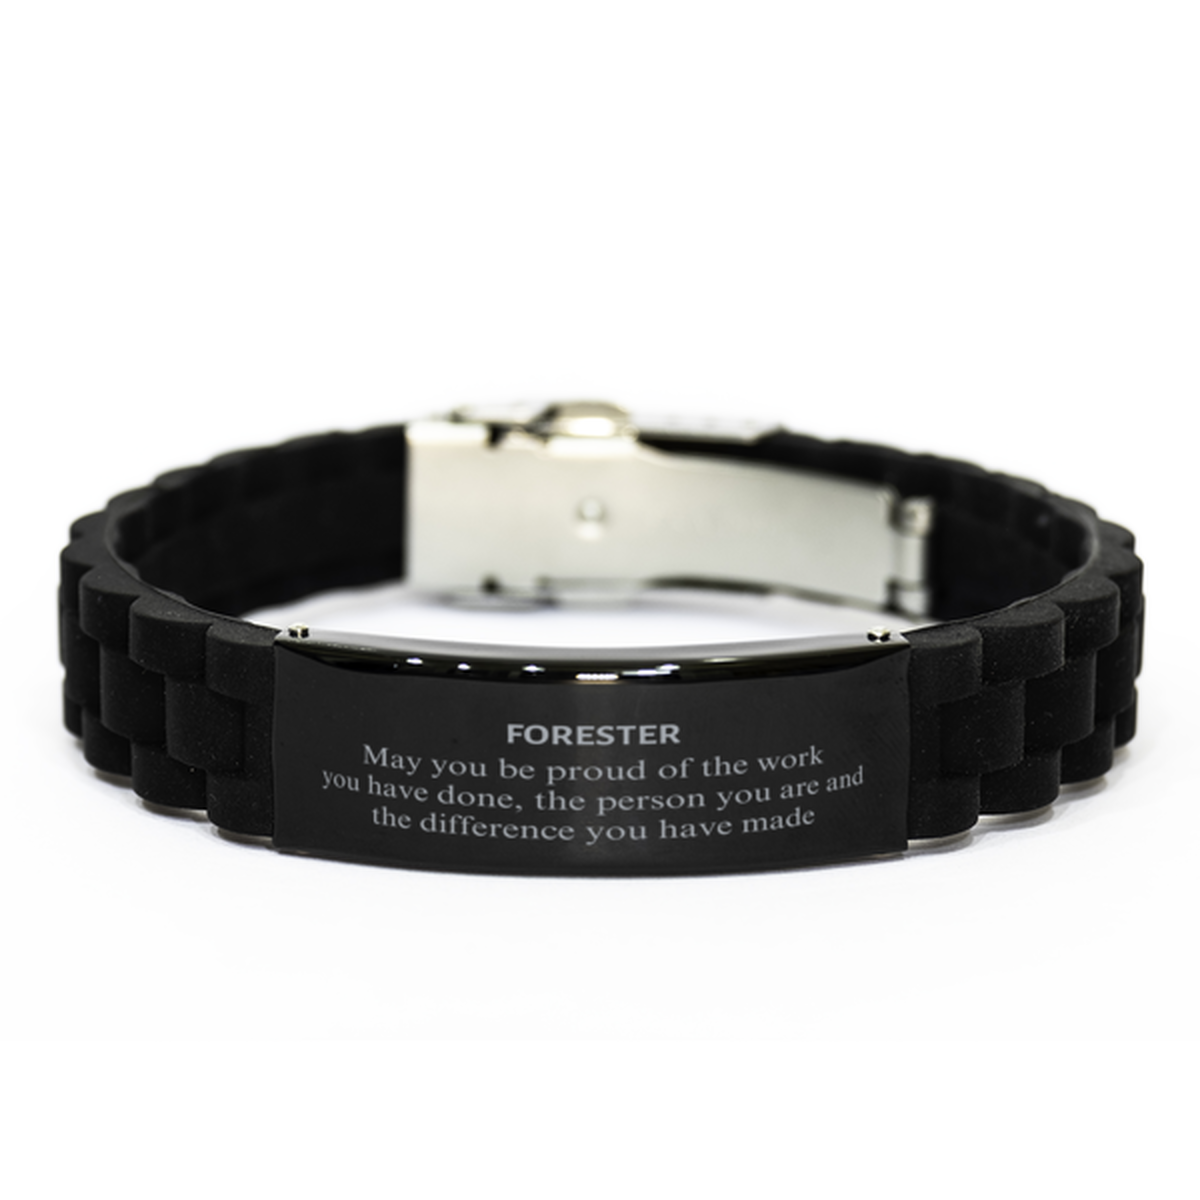 Forester May you be proud of the work you have done, Retirement Forester Black Glidelock Clasp Bracelet for Colleague Appreciation Gifts Amazing for Forester